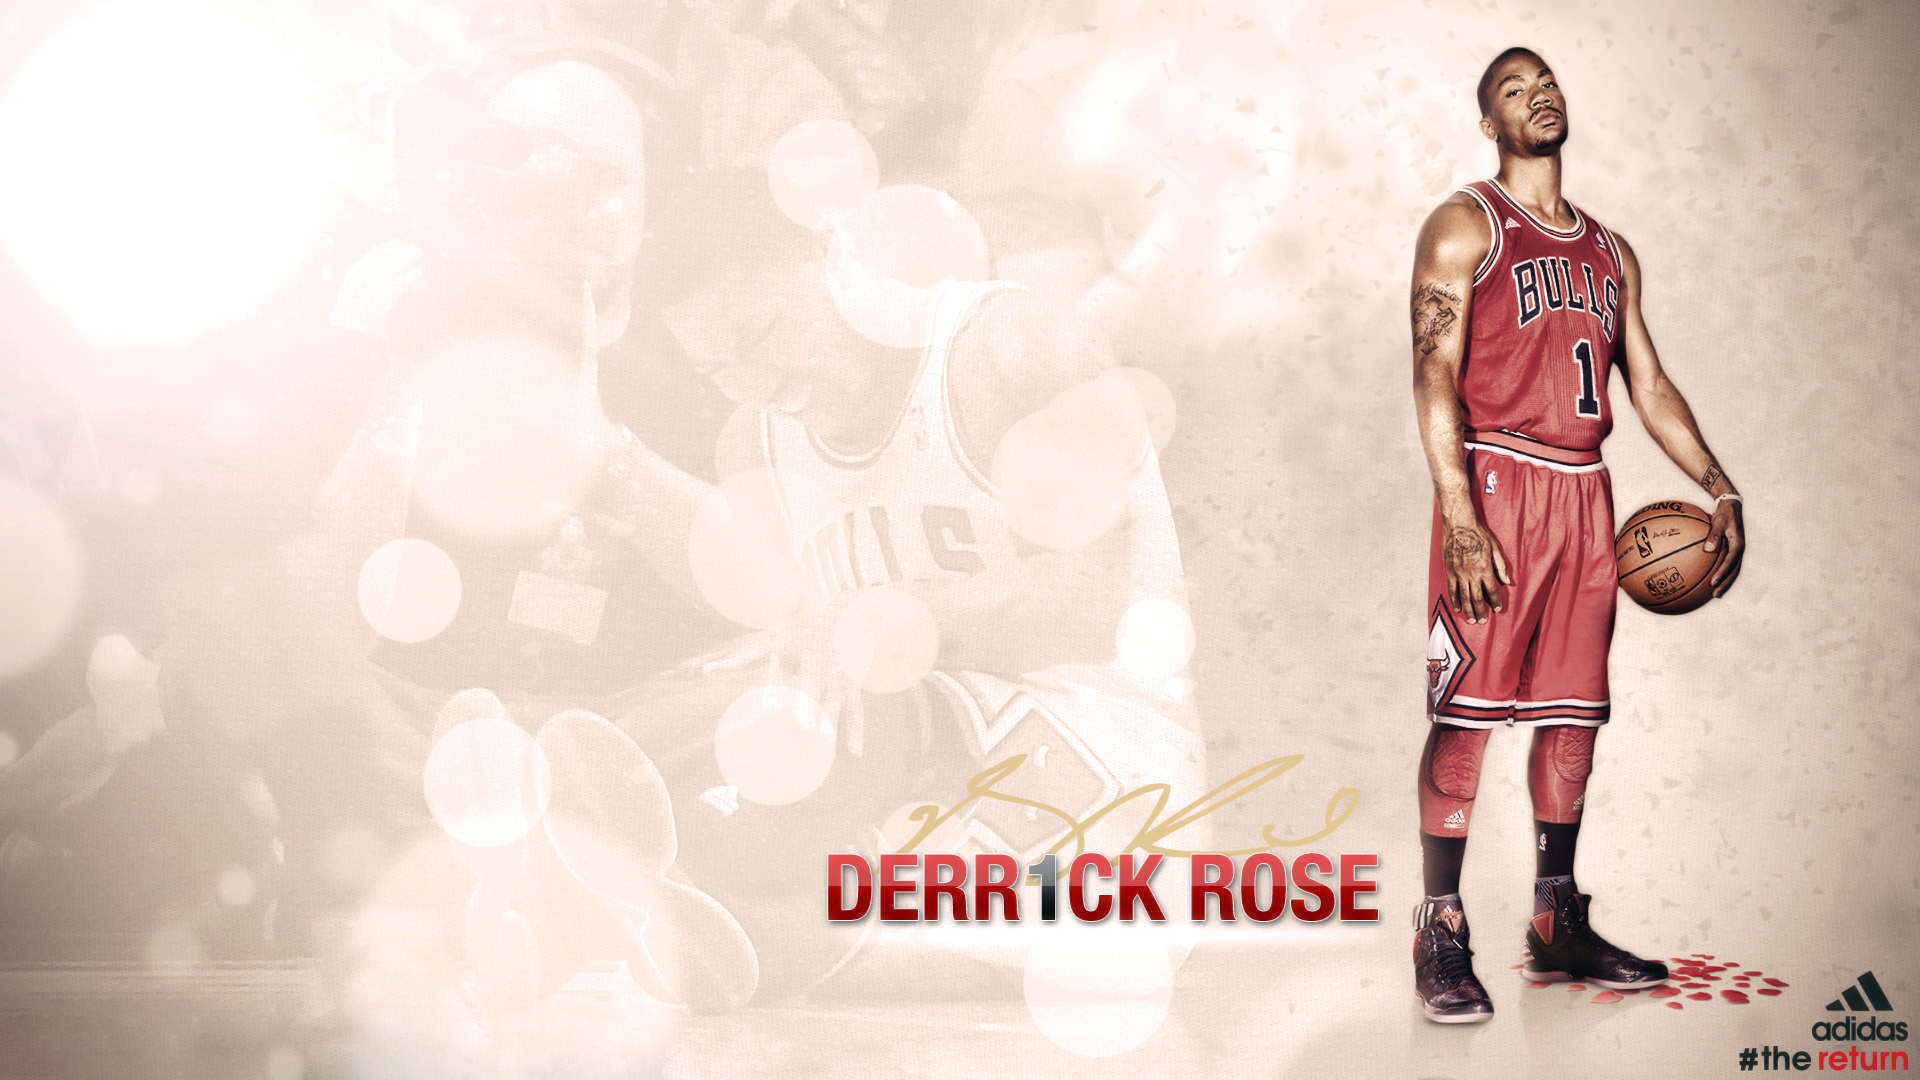 Derrick Rose Hd Nba Wallpaper Hd Sports 4k Wallpapers Images Photos And Background Wallpapers Den